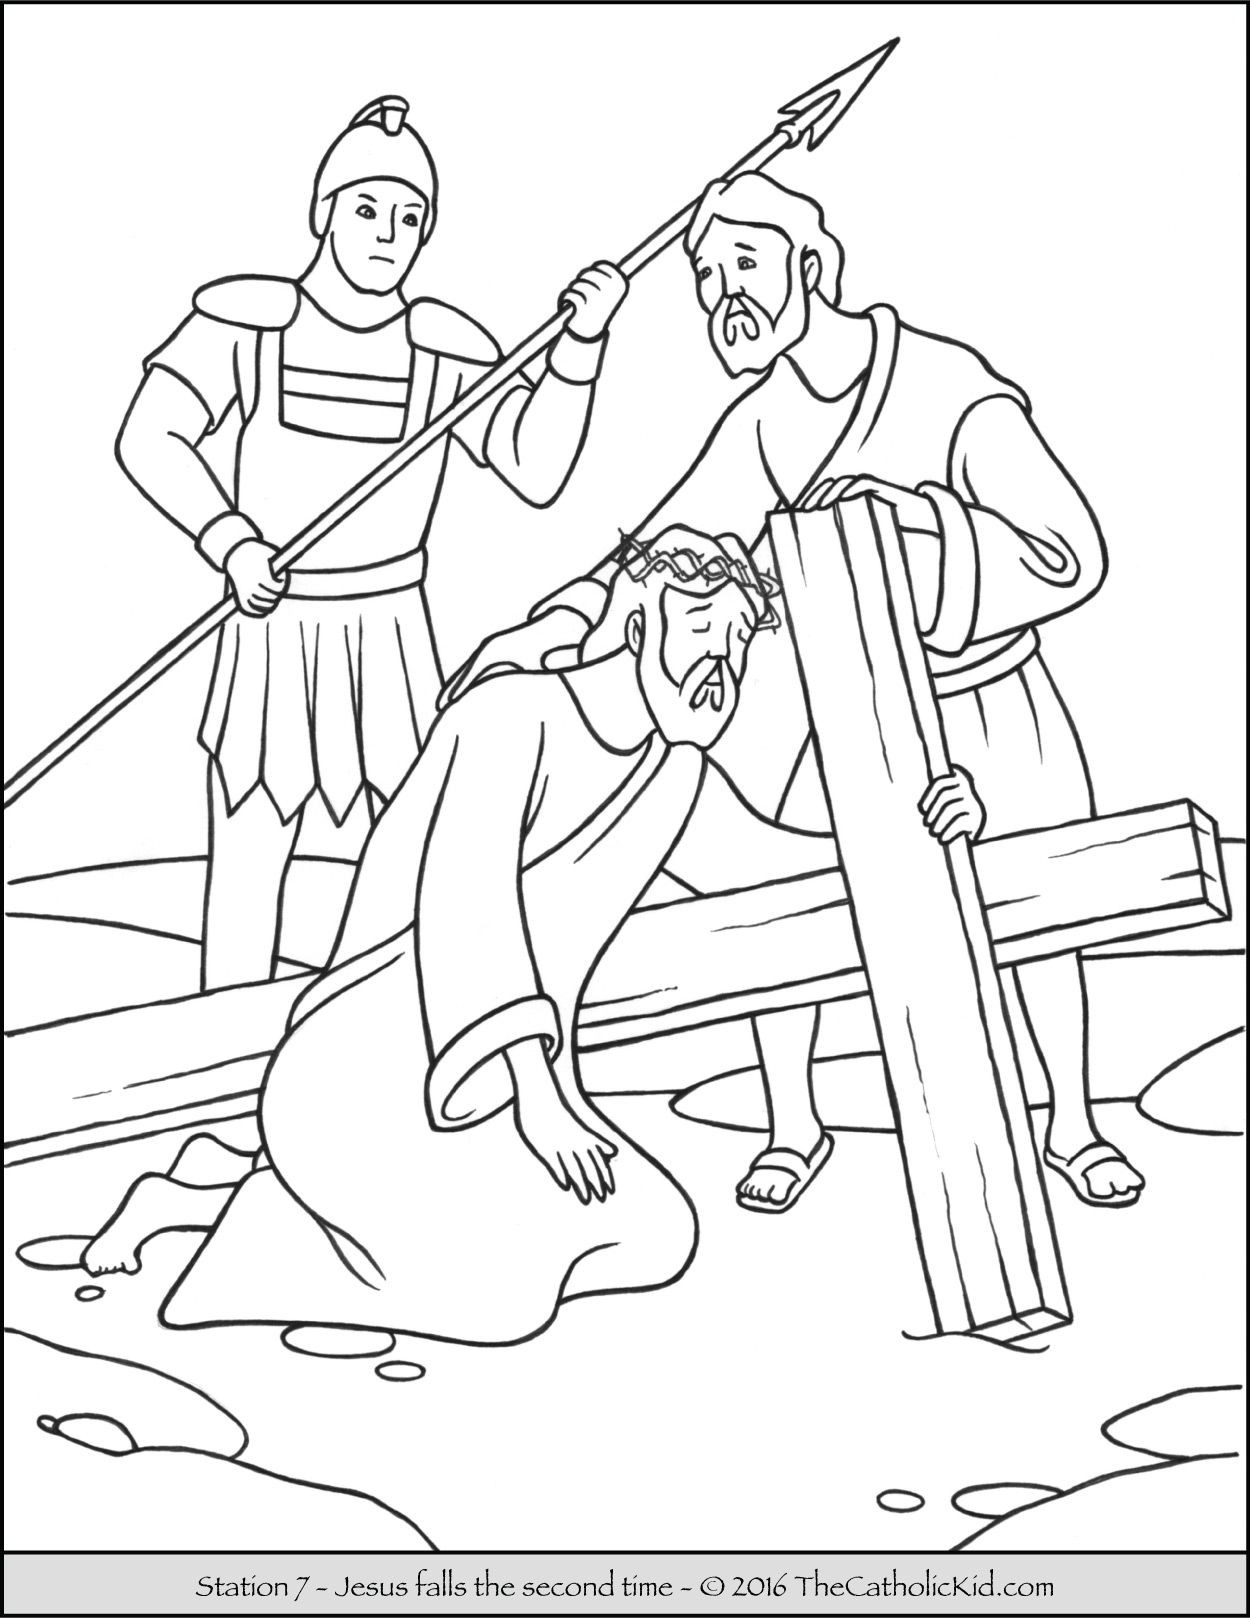 worksheet ~ Jesus On Cross Coloringage Getcoloringpages Comictures Of  Therintable Free 59 Outstanding Printable Pictures Of Jesus To Color. Coloring  Pictures Of Jesus Christ. Printable Coloring Pictures Of Jesus. Pictures Of  Jesus.